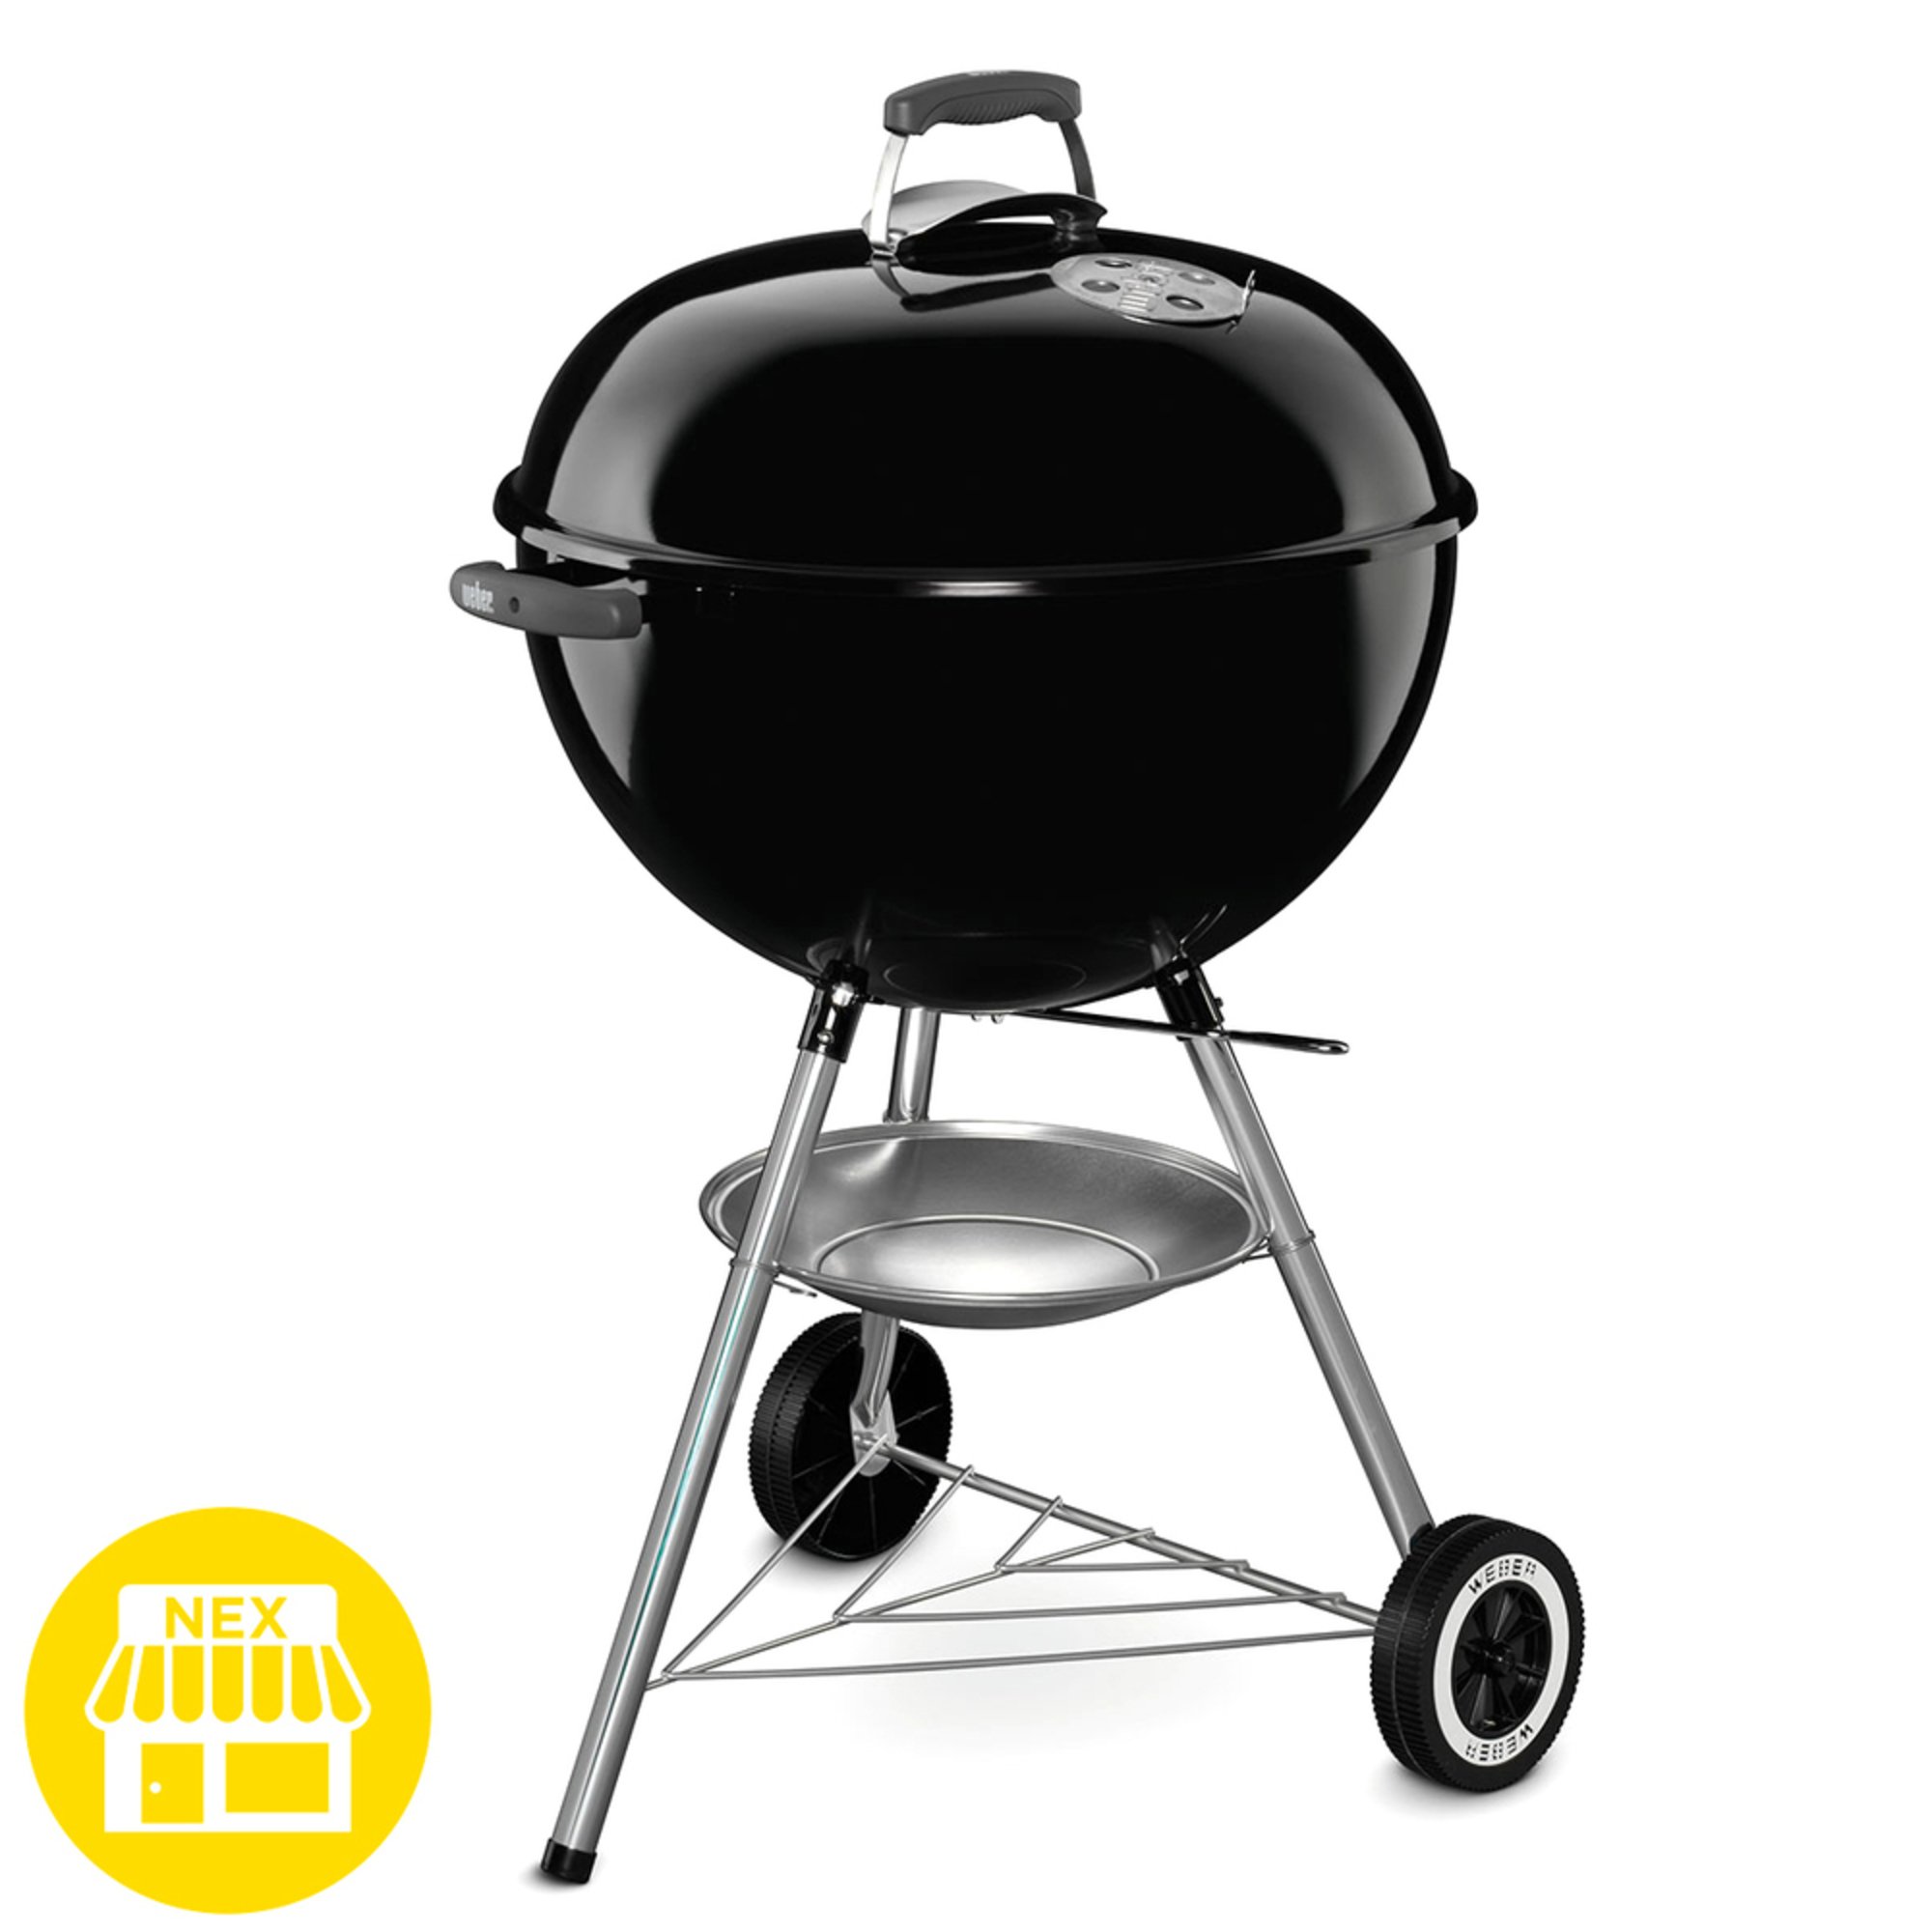 weber-original-one-touch-22-5-charcoal-kettle-grill-charcoal-grills